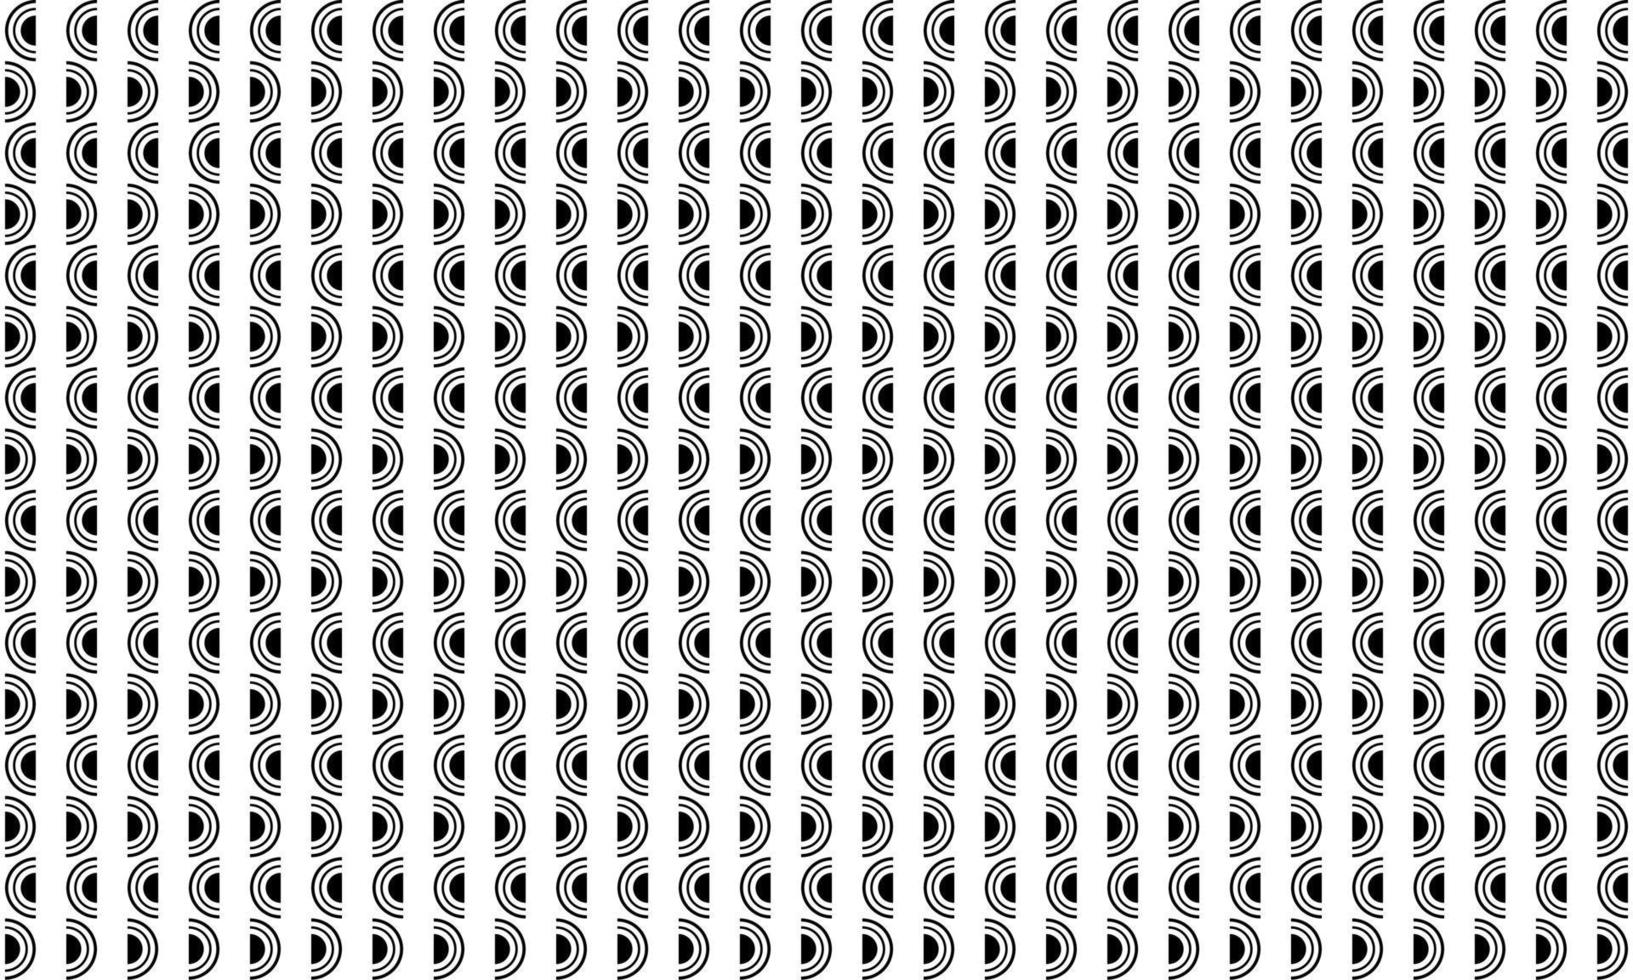 Half Circle Motifs Pattern. Motifs Pattern for Ornate or for Decoration for Interior, Exterior, Carpet, Textile, Garment, Cloth, Silk, Tile, Plastic, Paper, Wrapping, Wallpaper, Ect. Vector